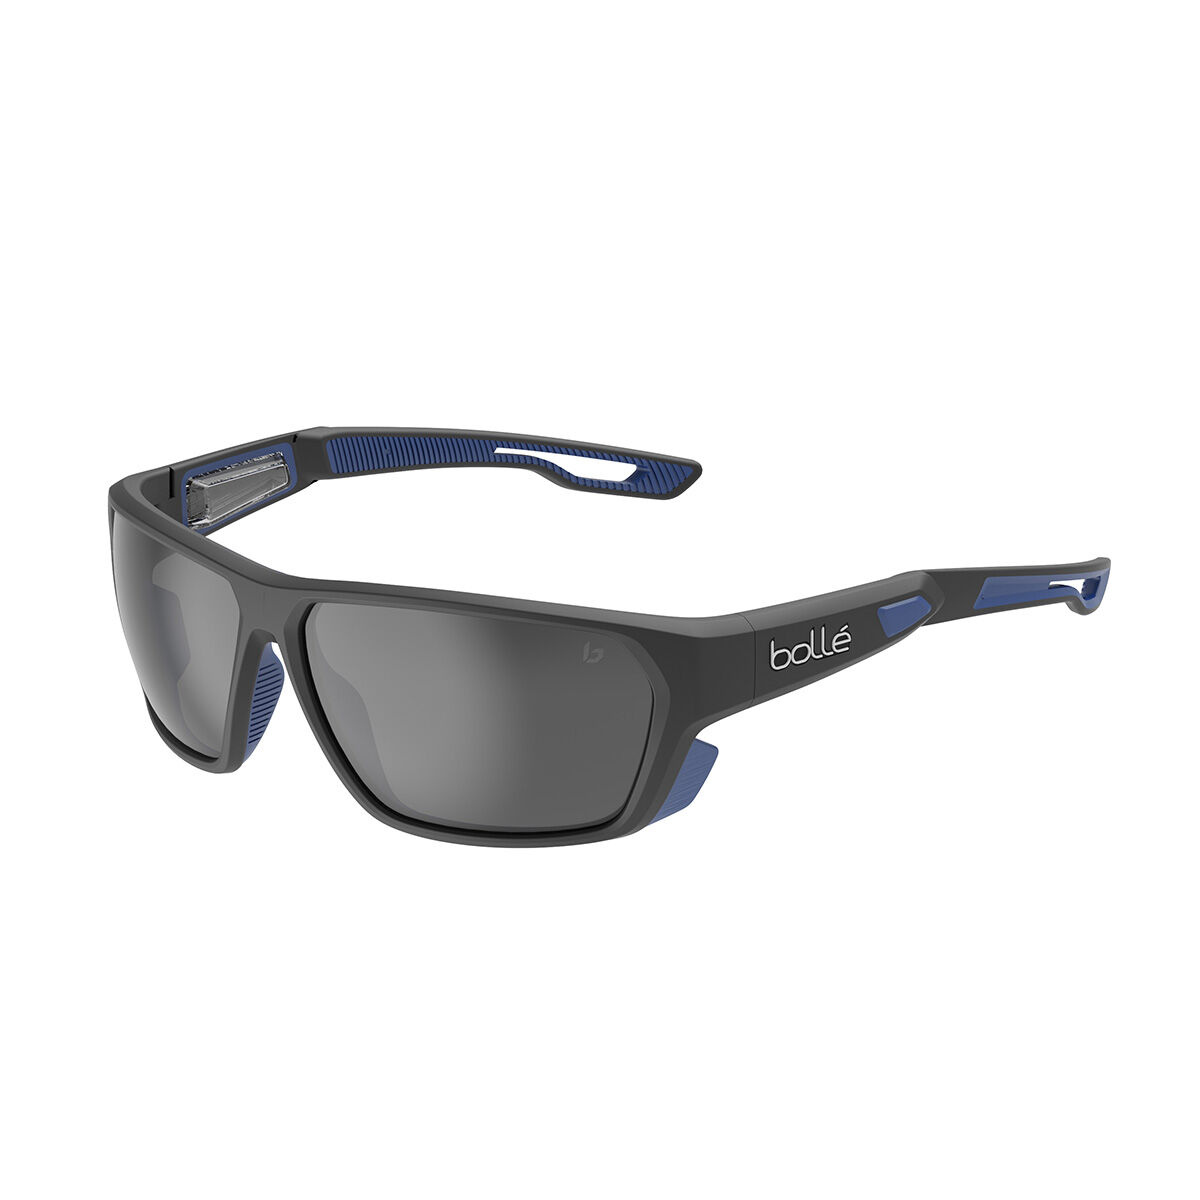 Bolle SWAT Tactical Ballistic Sunglasses with Polarized Lens